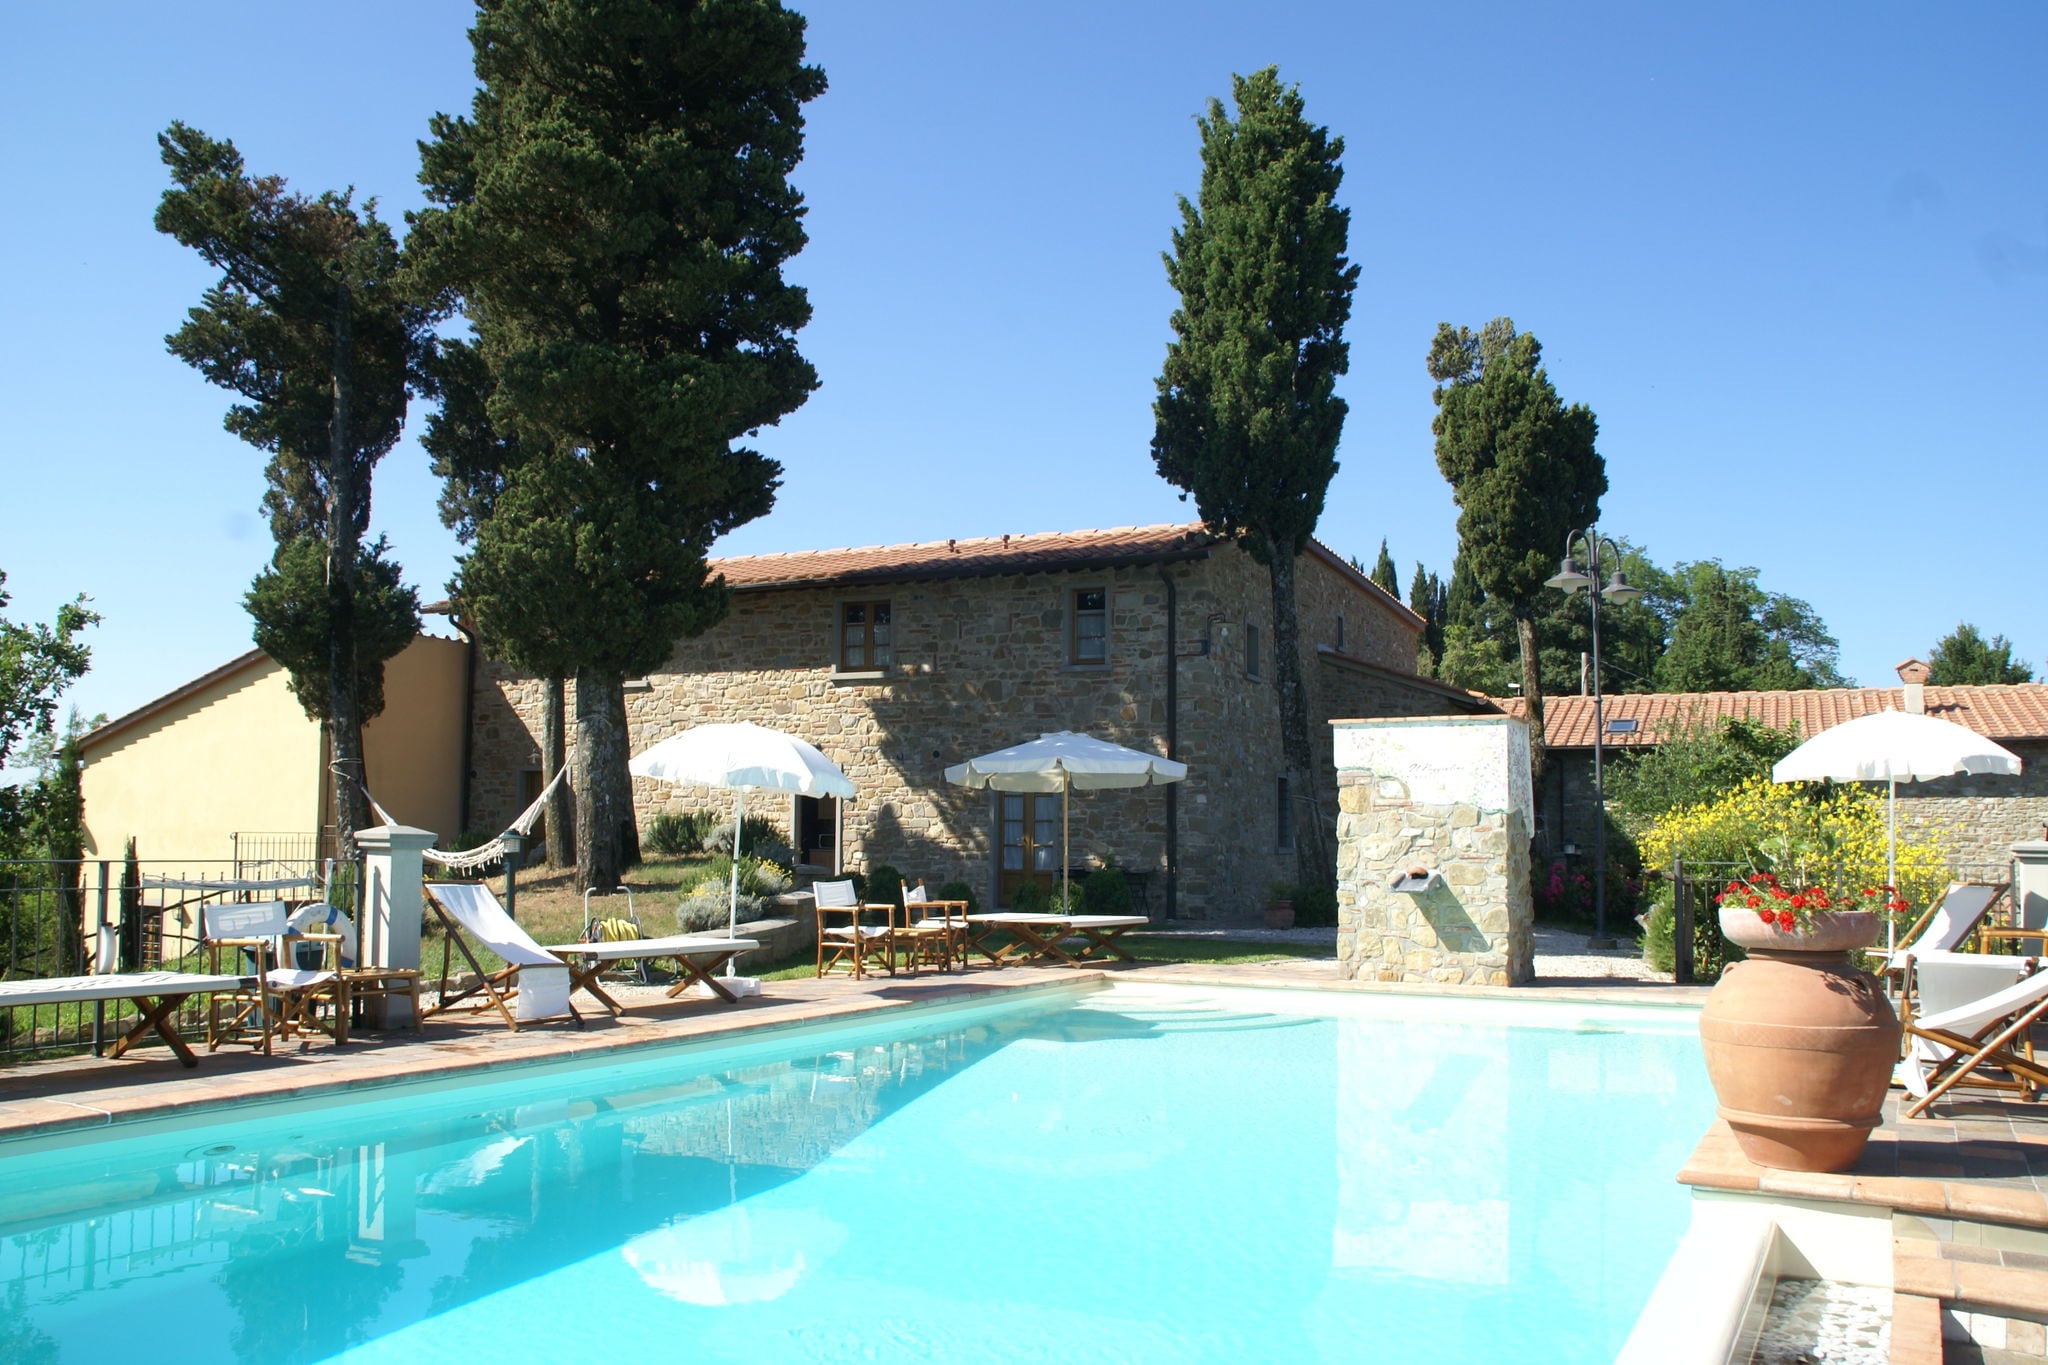 Charming apartment in an old farmhouse with swimming pool in a beautiful setting